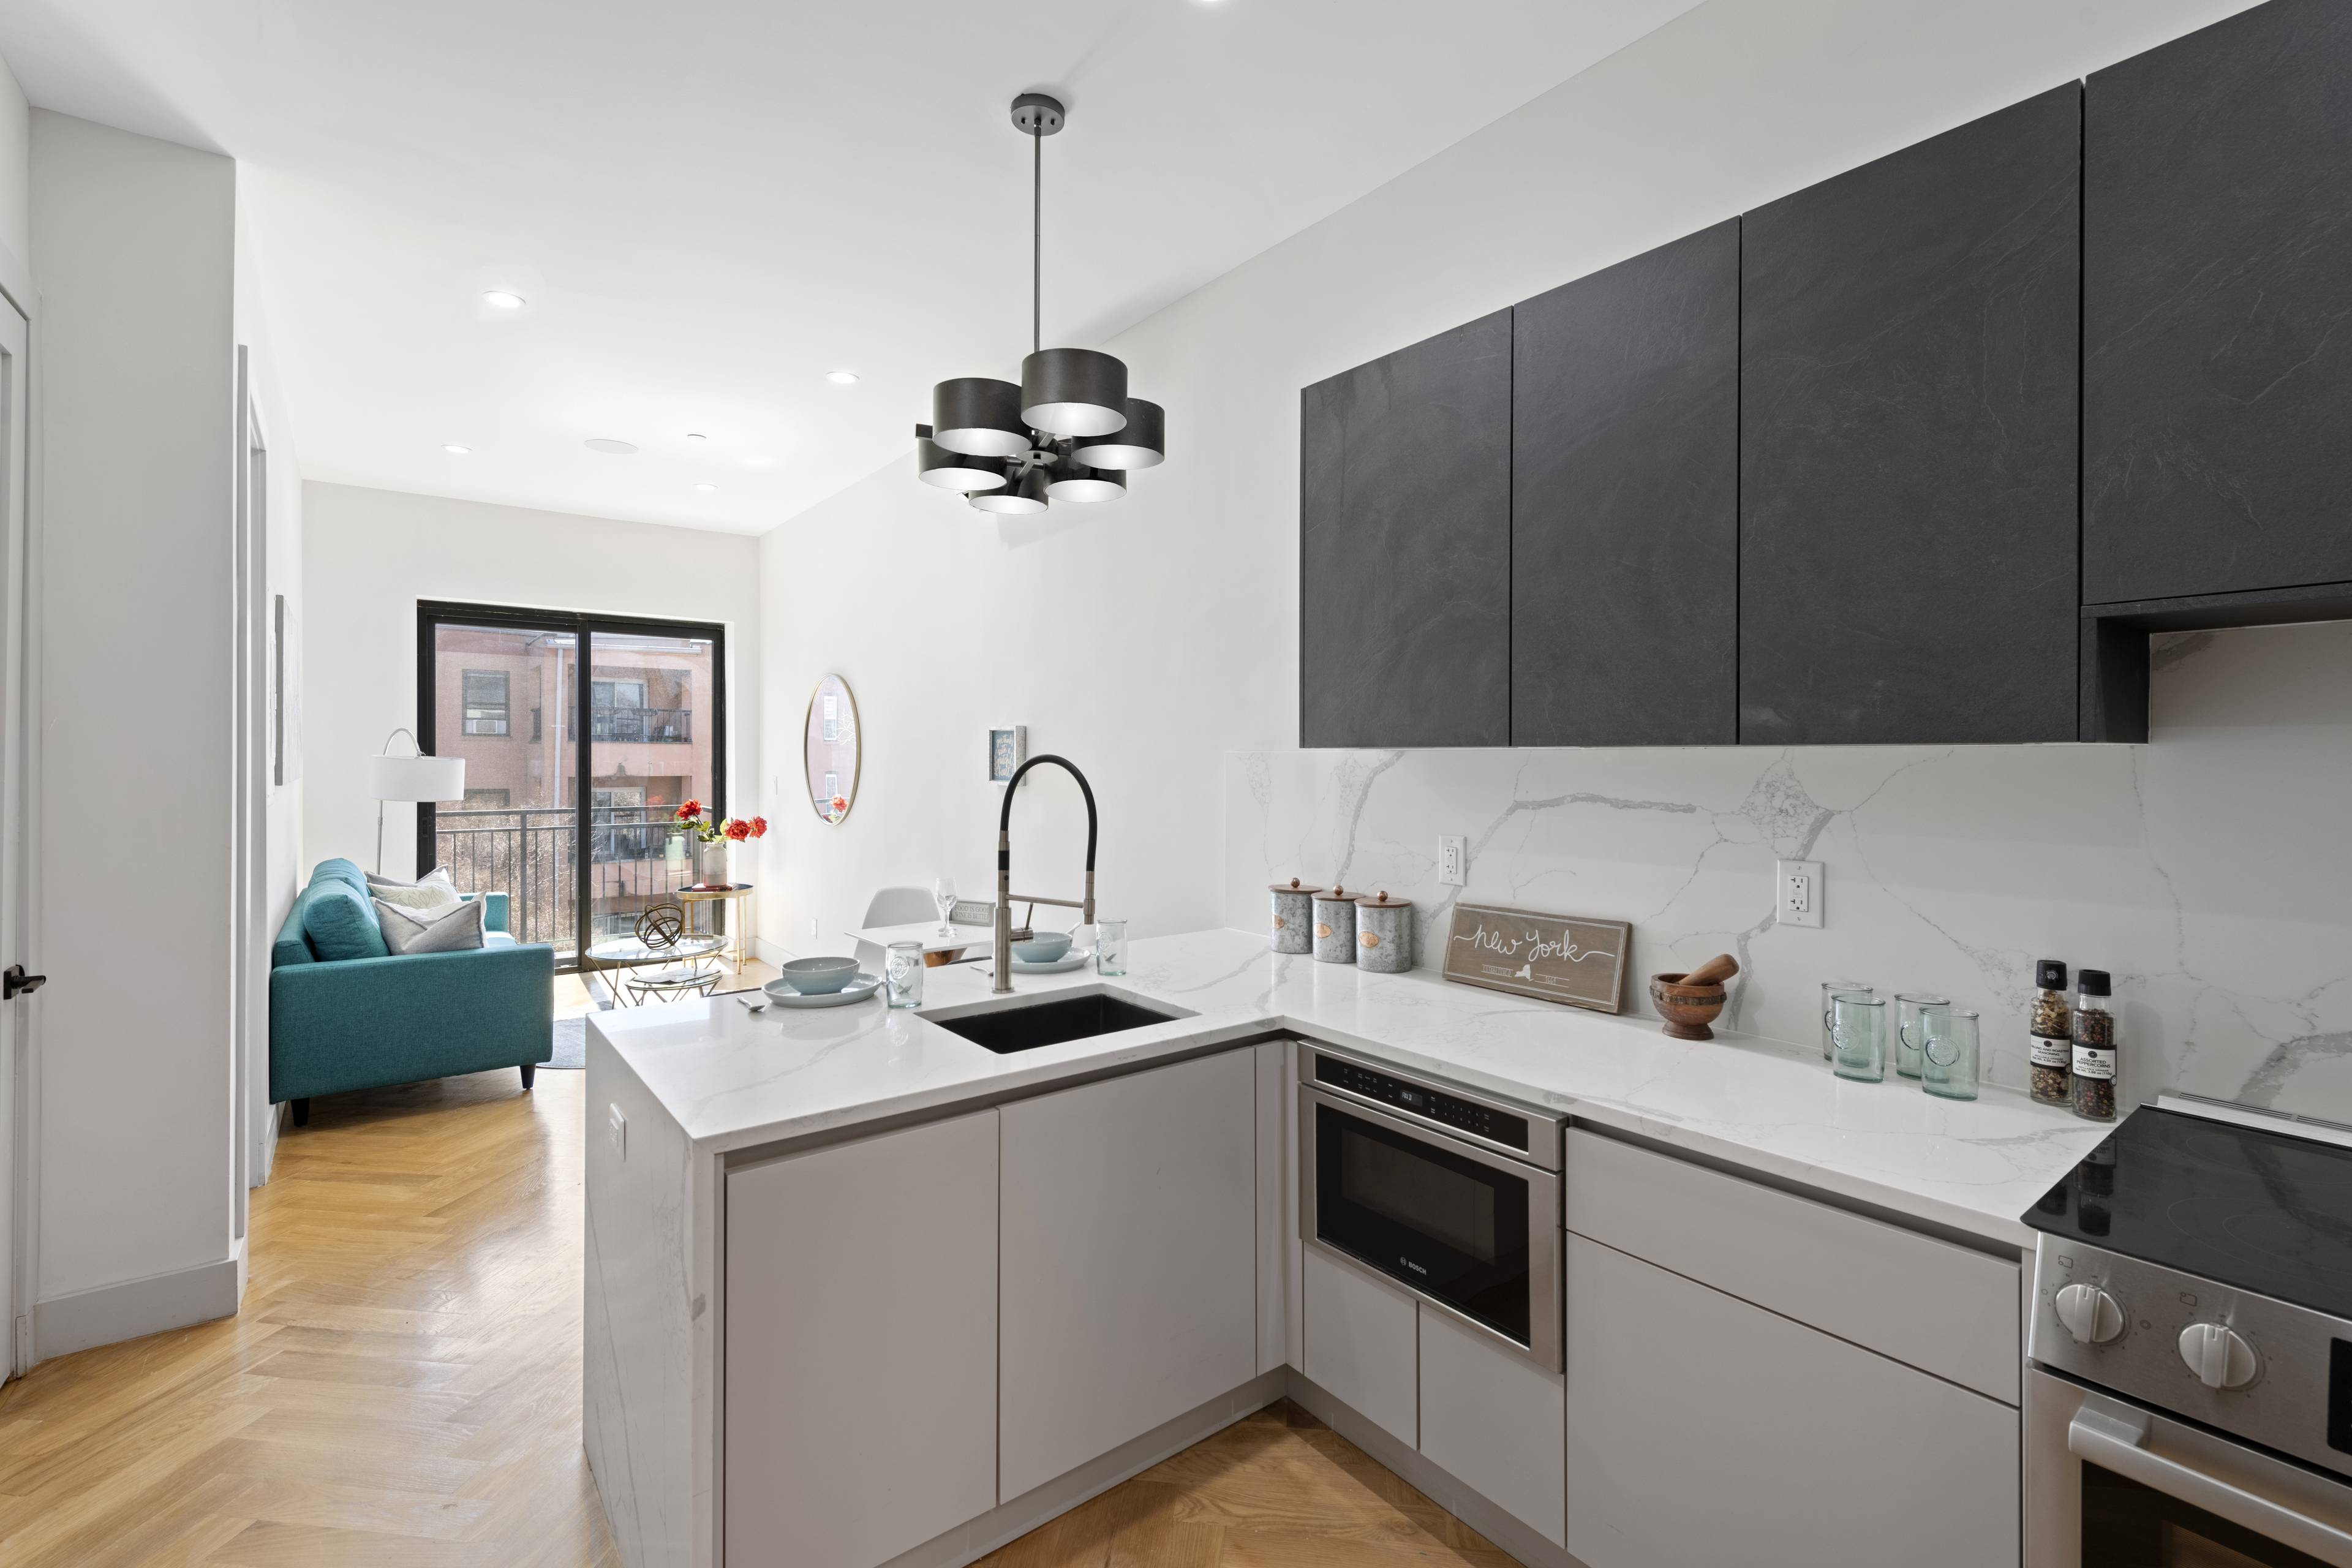 Effortless designer style combines with exceptional private outdoor space in this stunning one bedroom plus bonus room, two bathroom penthouse duplex in a boutique new construction Bed Stuy condominium.